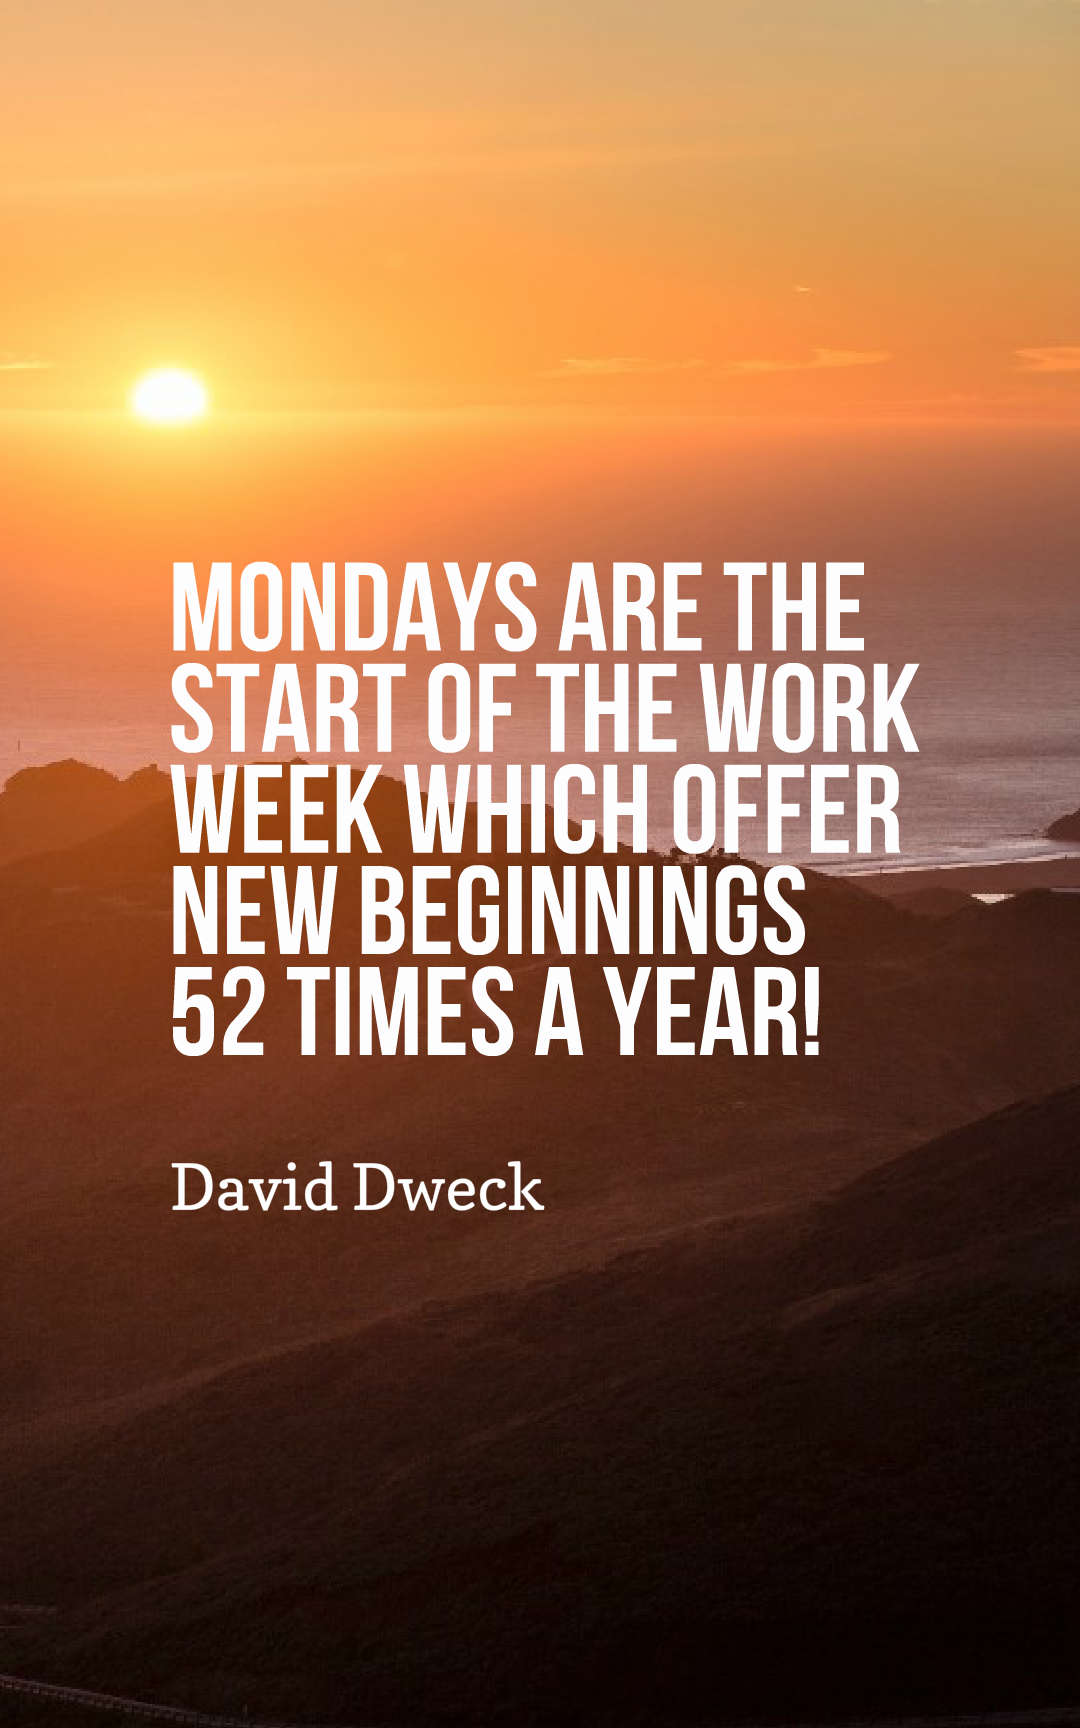 Mondays are the start of the work week which offer new beginnings 52 times a year!